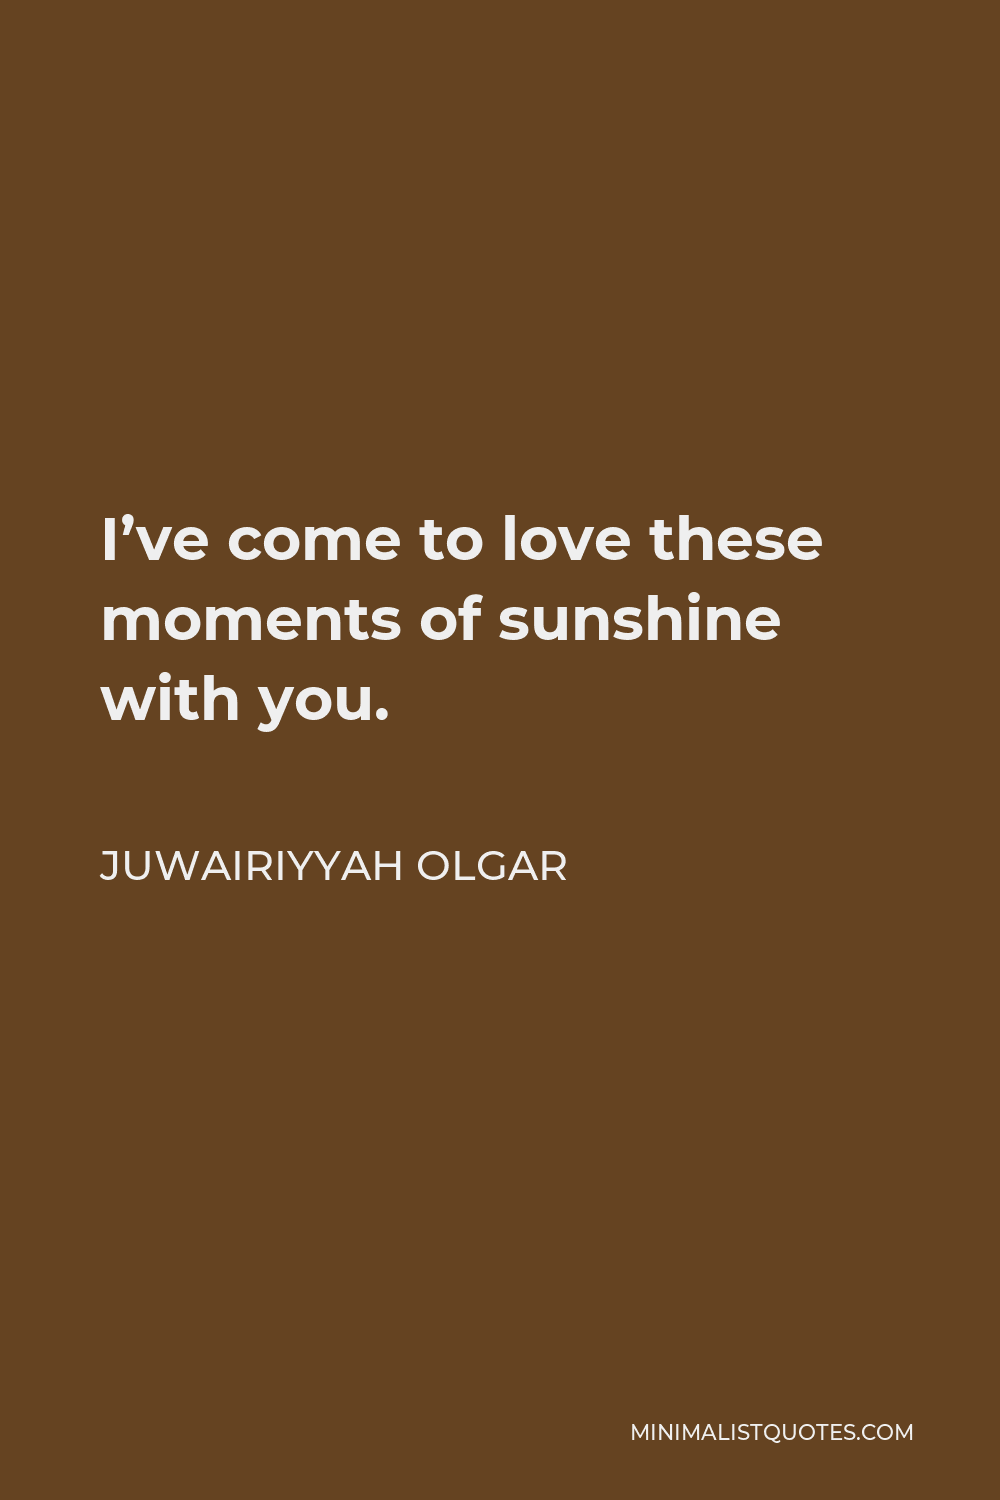 Juwairiyyah Olgar Quote - I’ve come to love these moments of sunshine with you.